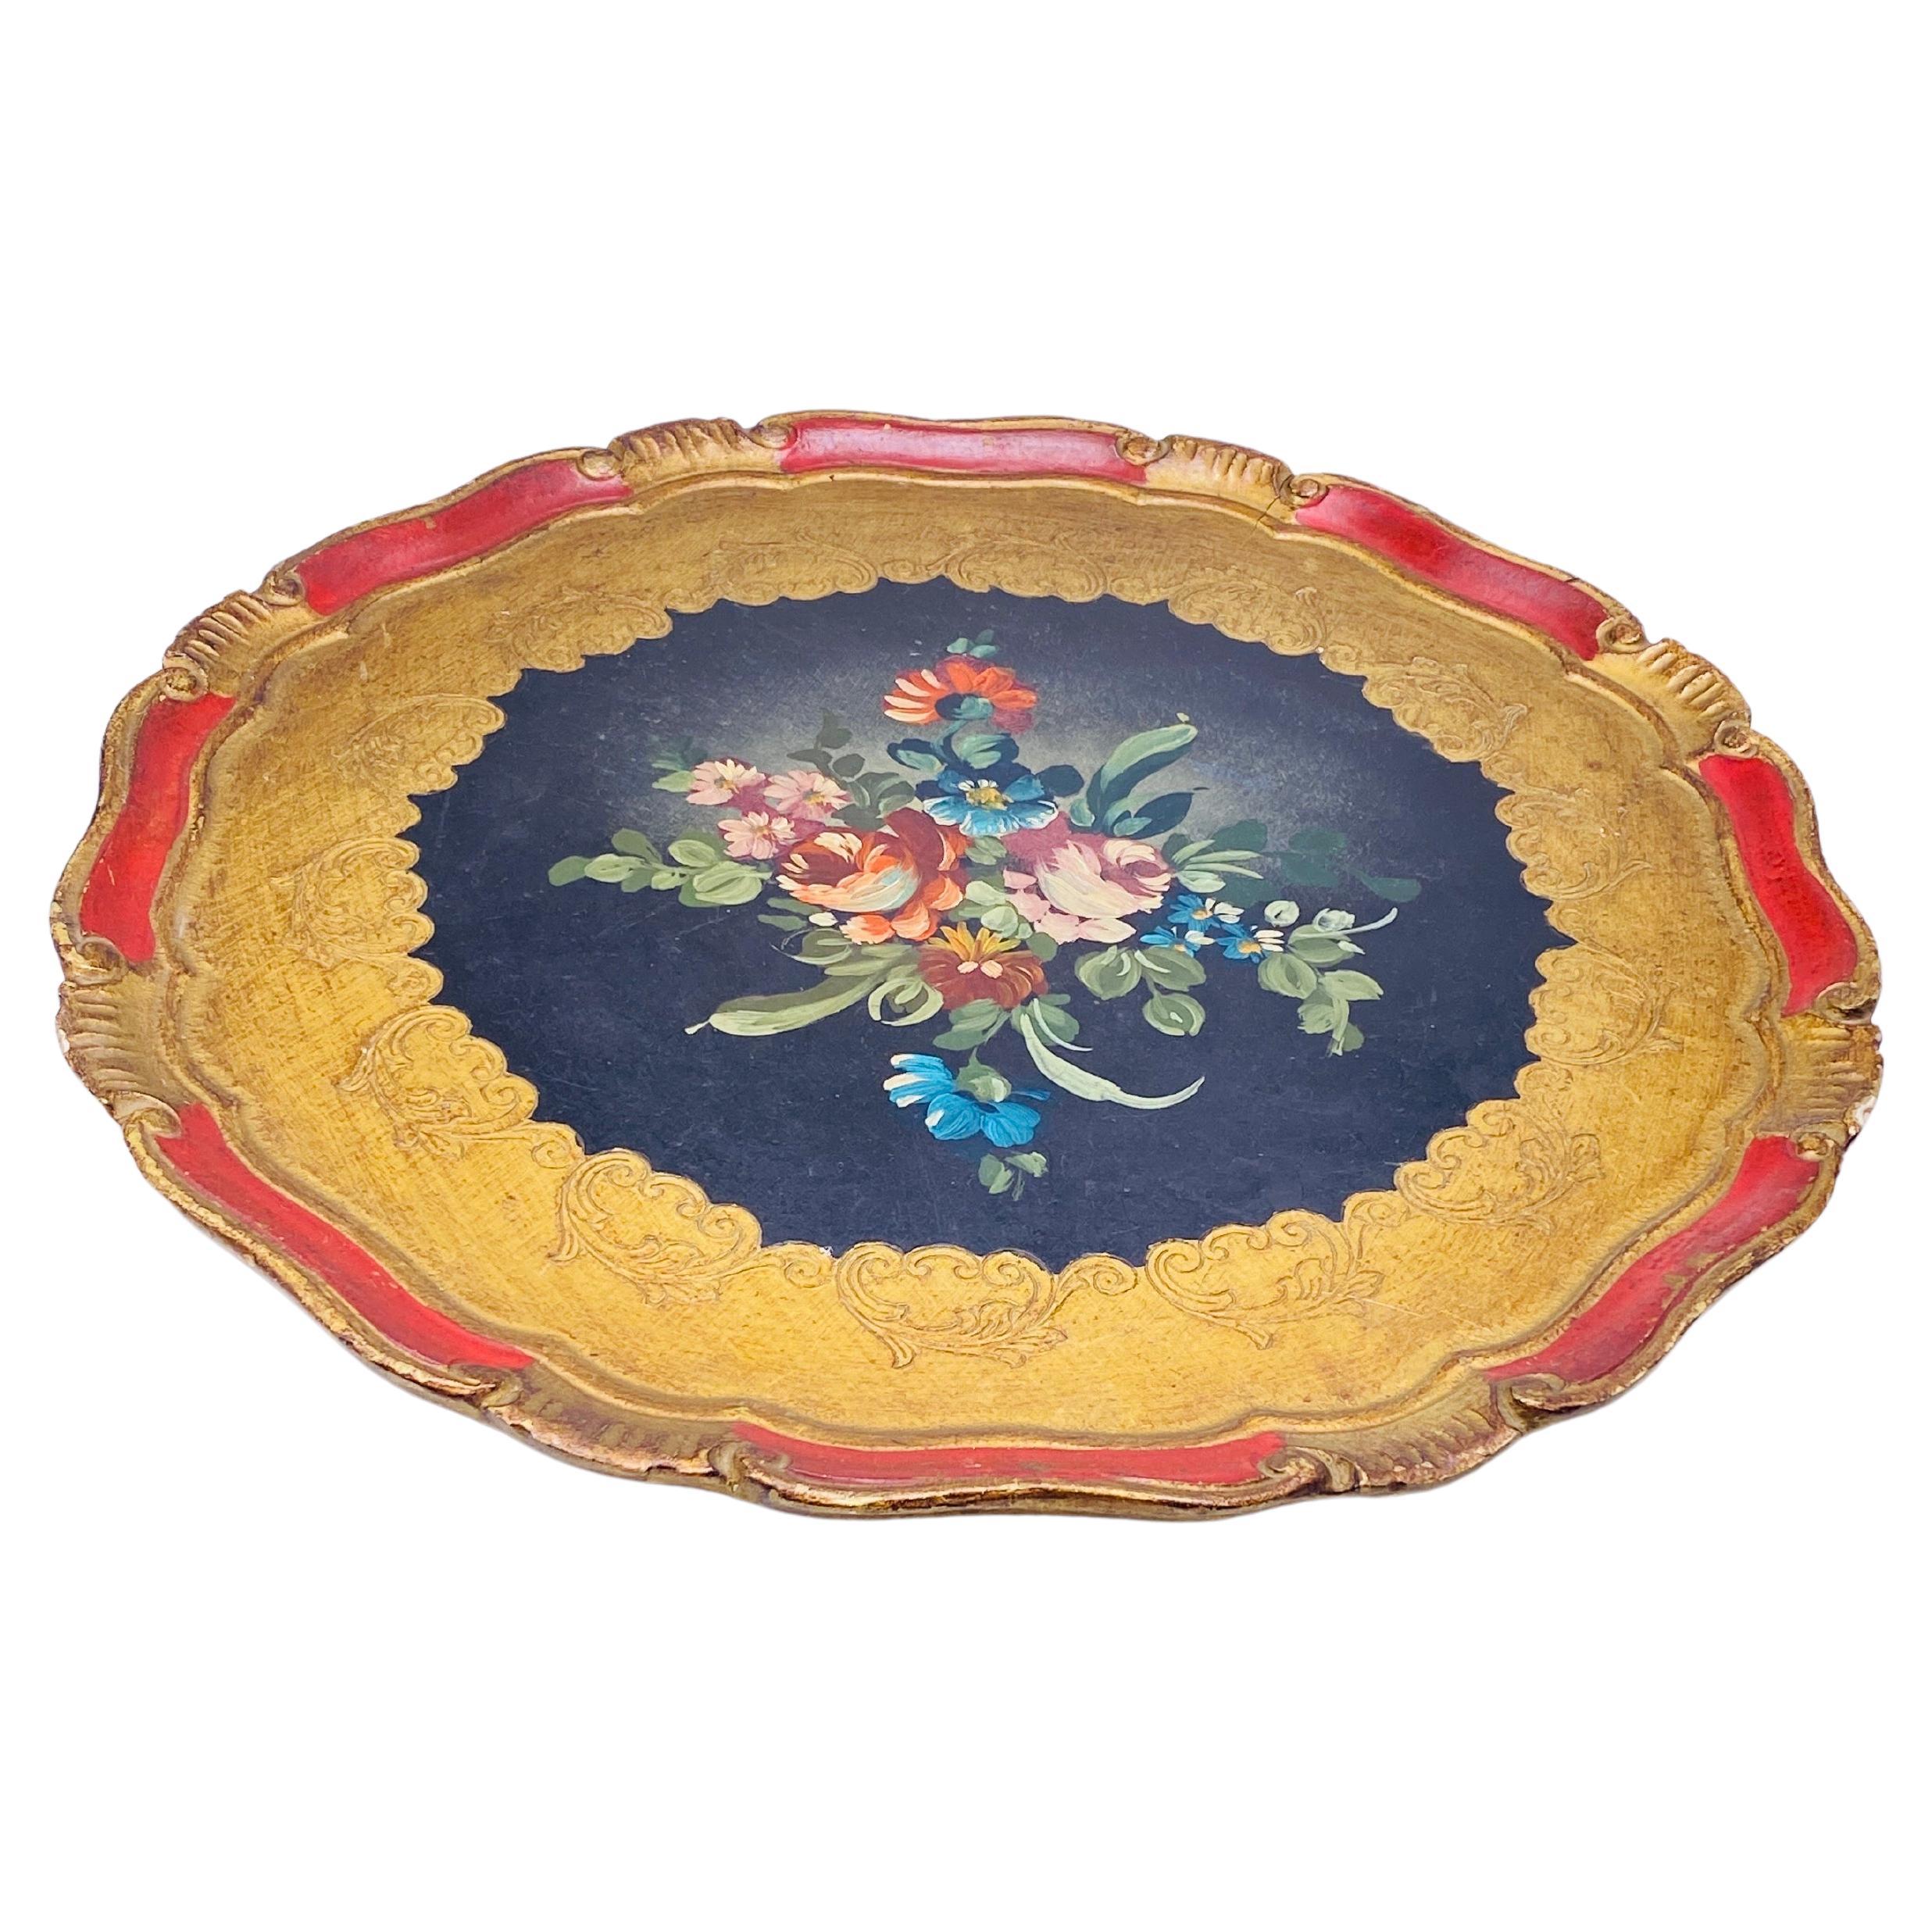 Wood Florentine Platter, Hand Painted with Floral Decor Patterns, Italy 1960